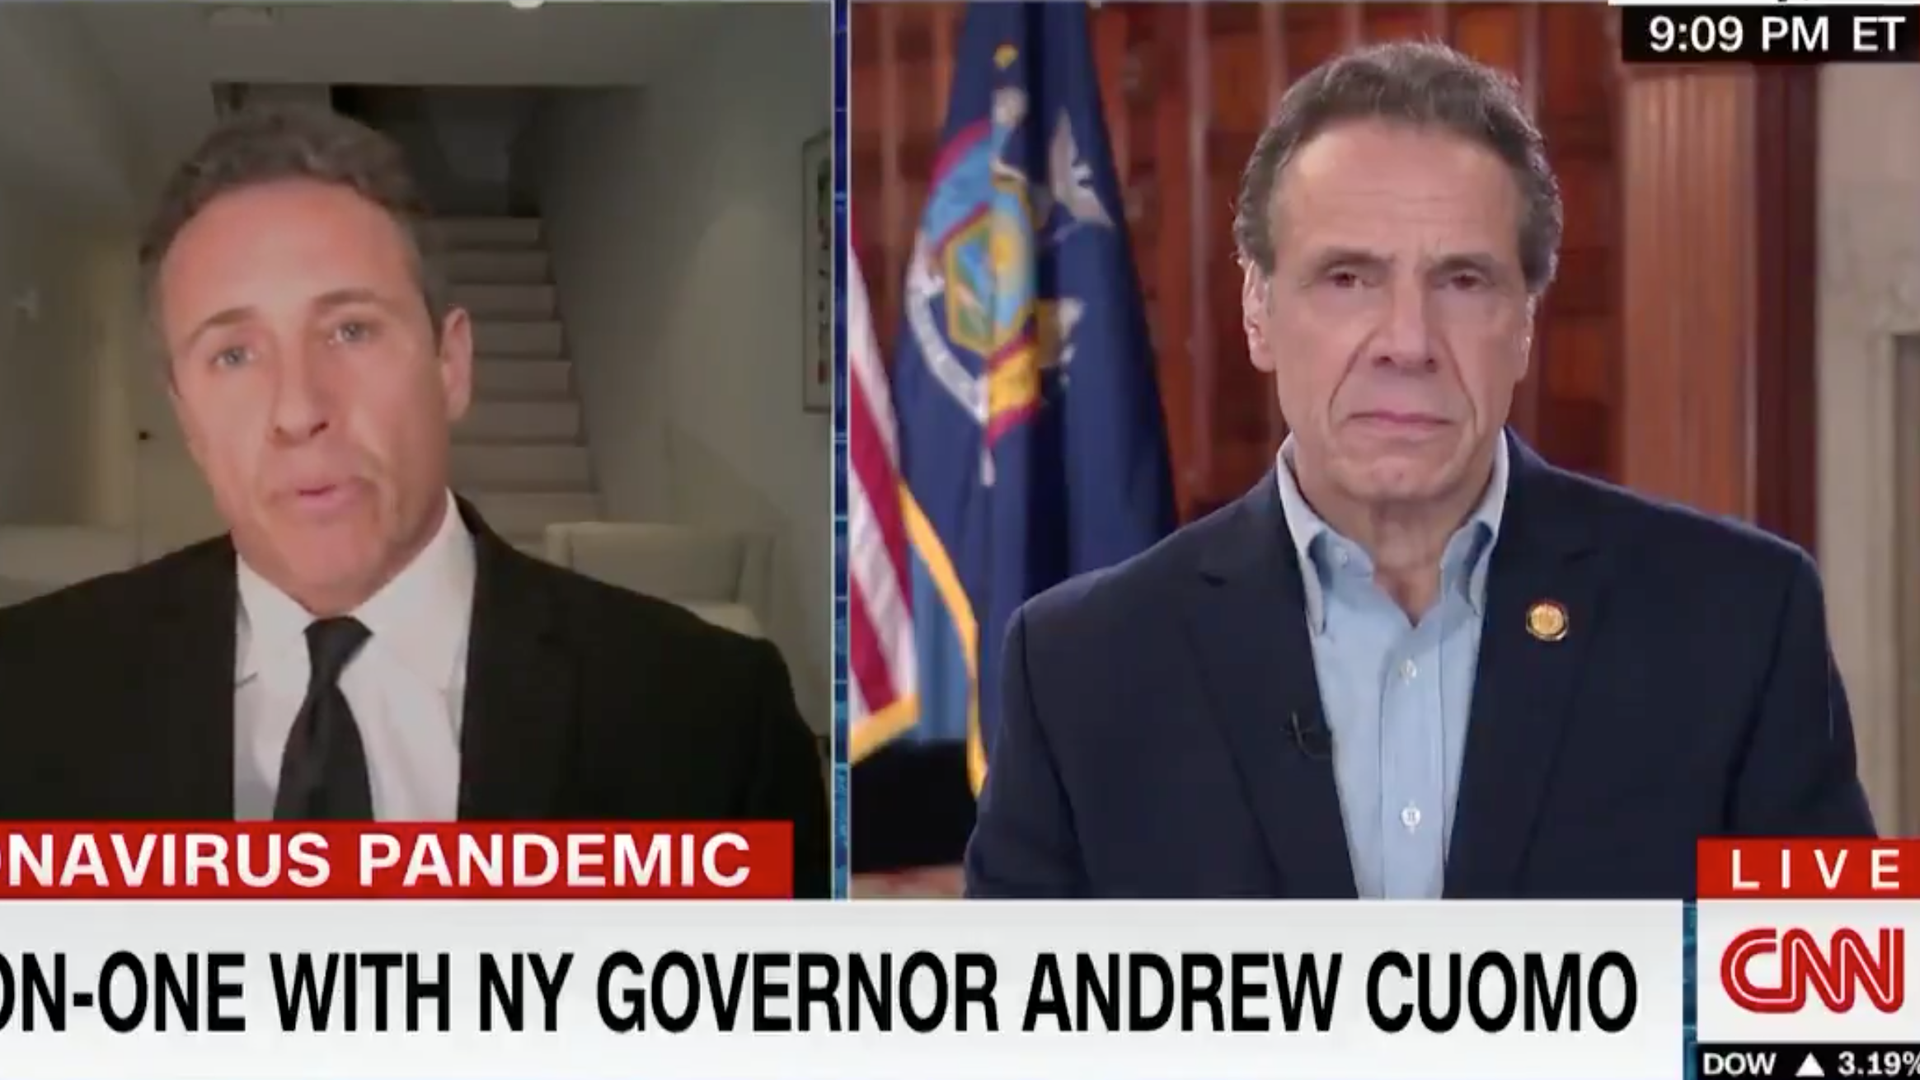 A screenshot of CNN's Chris Cuomo with his brother New York Gov. Andrew Cuomo on his show Monday.